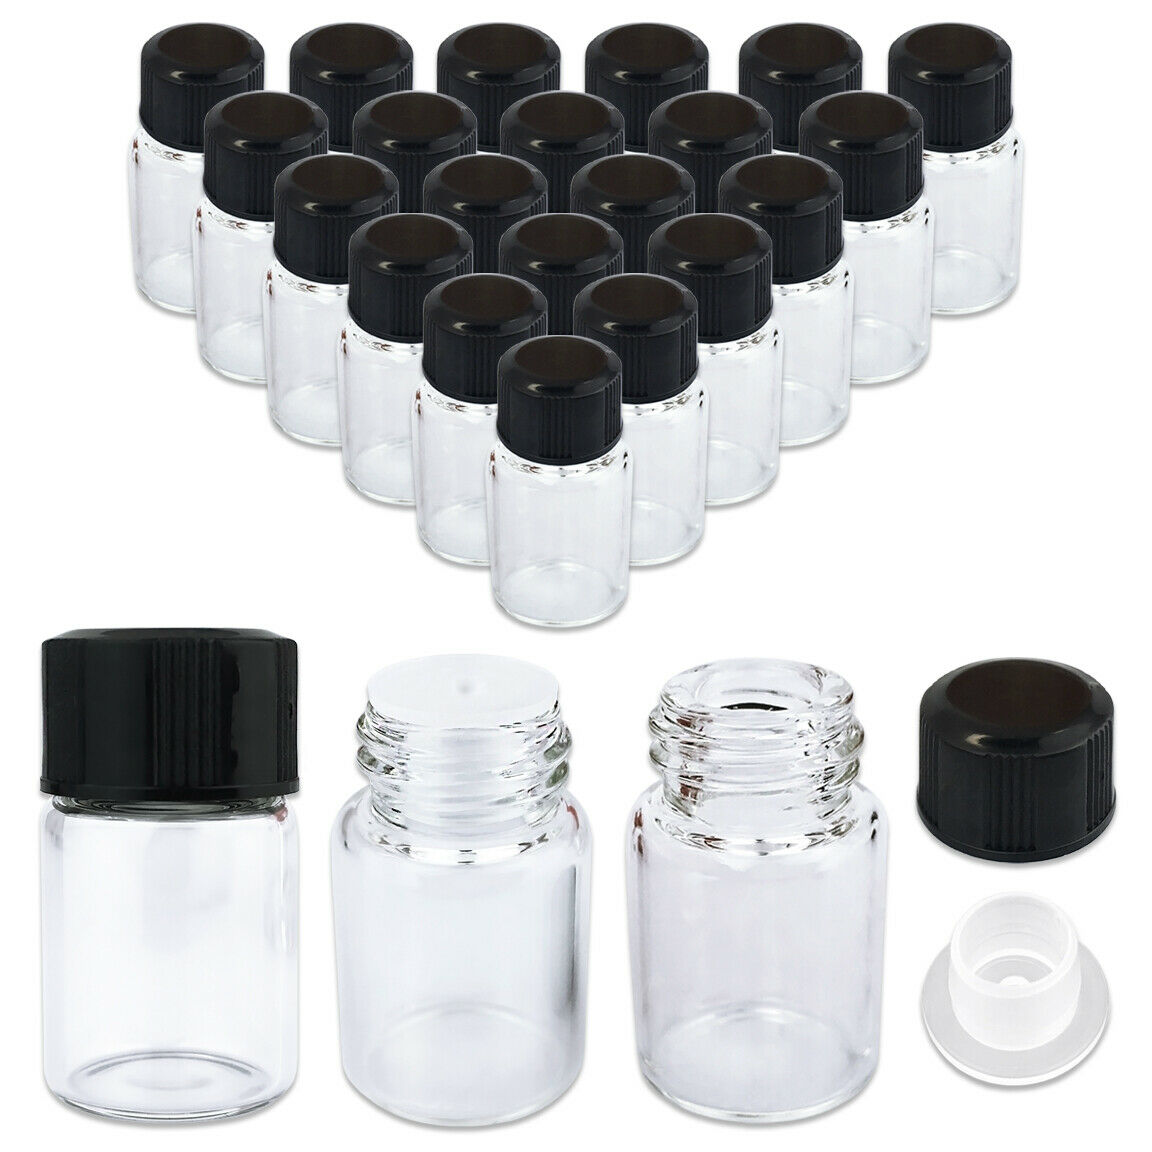 24 Pieces 2ml Clear Essential Oil Small Sample Glass Vials Bottles Containers